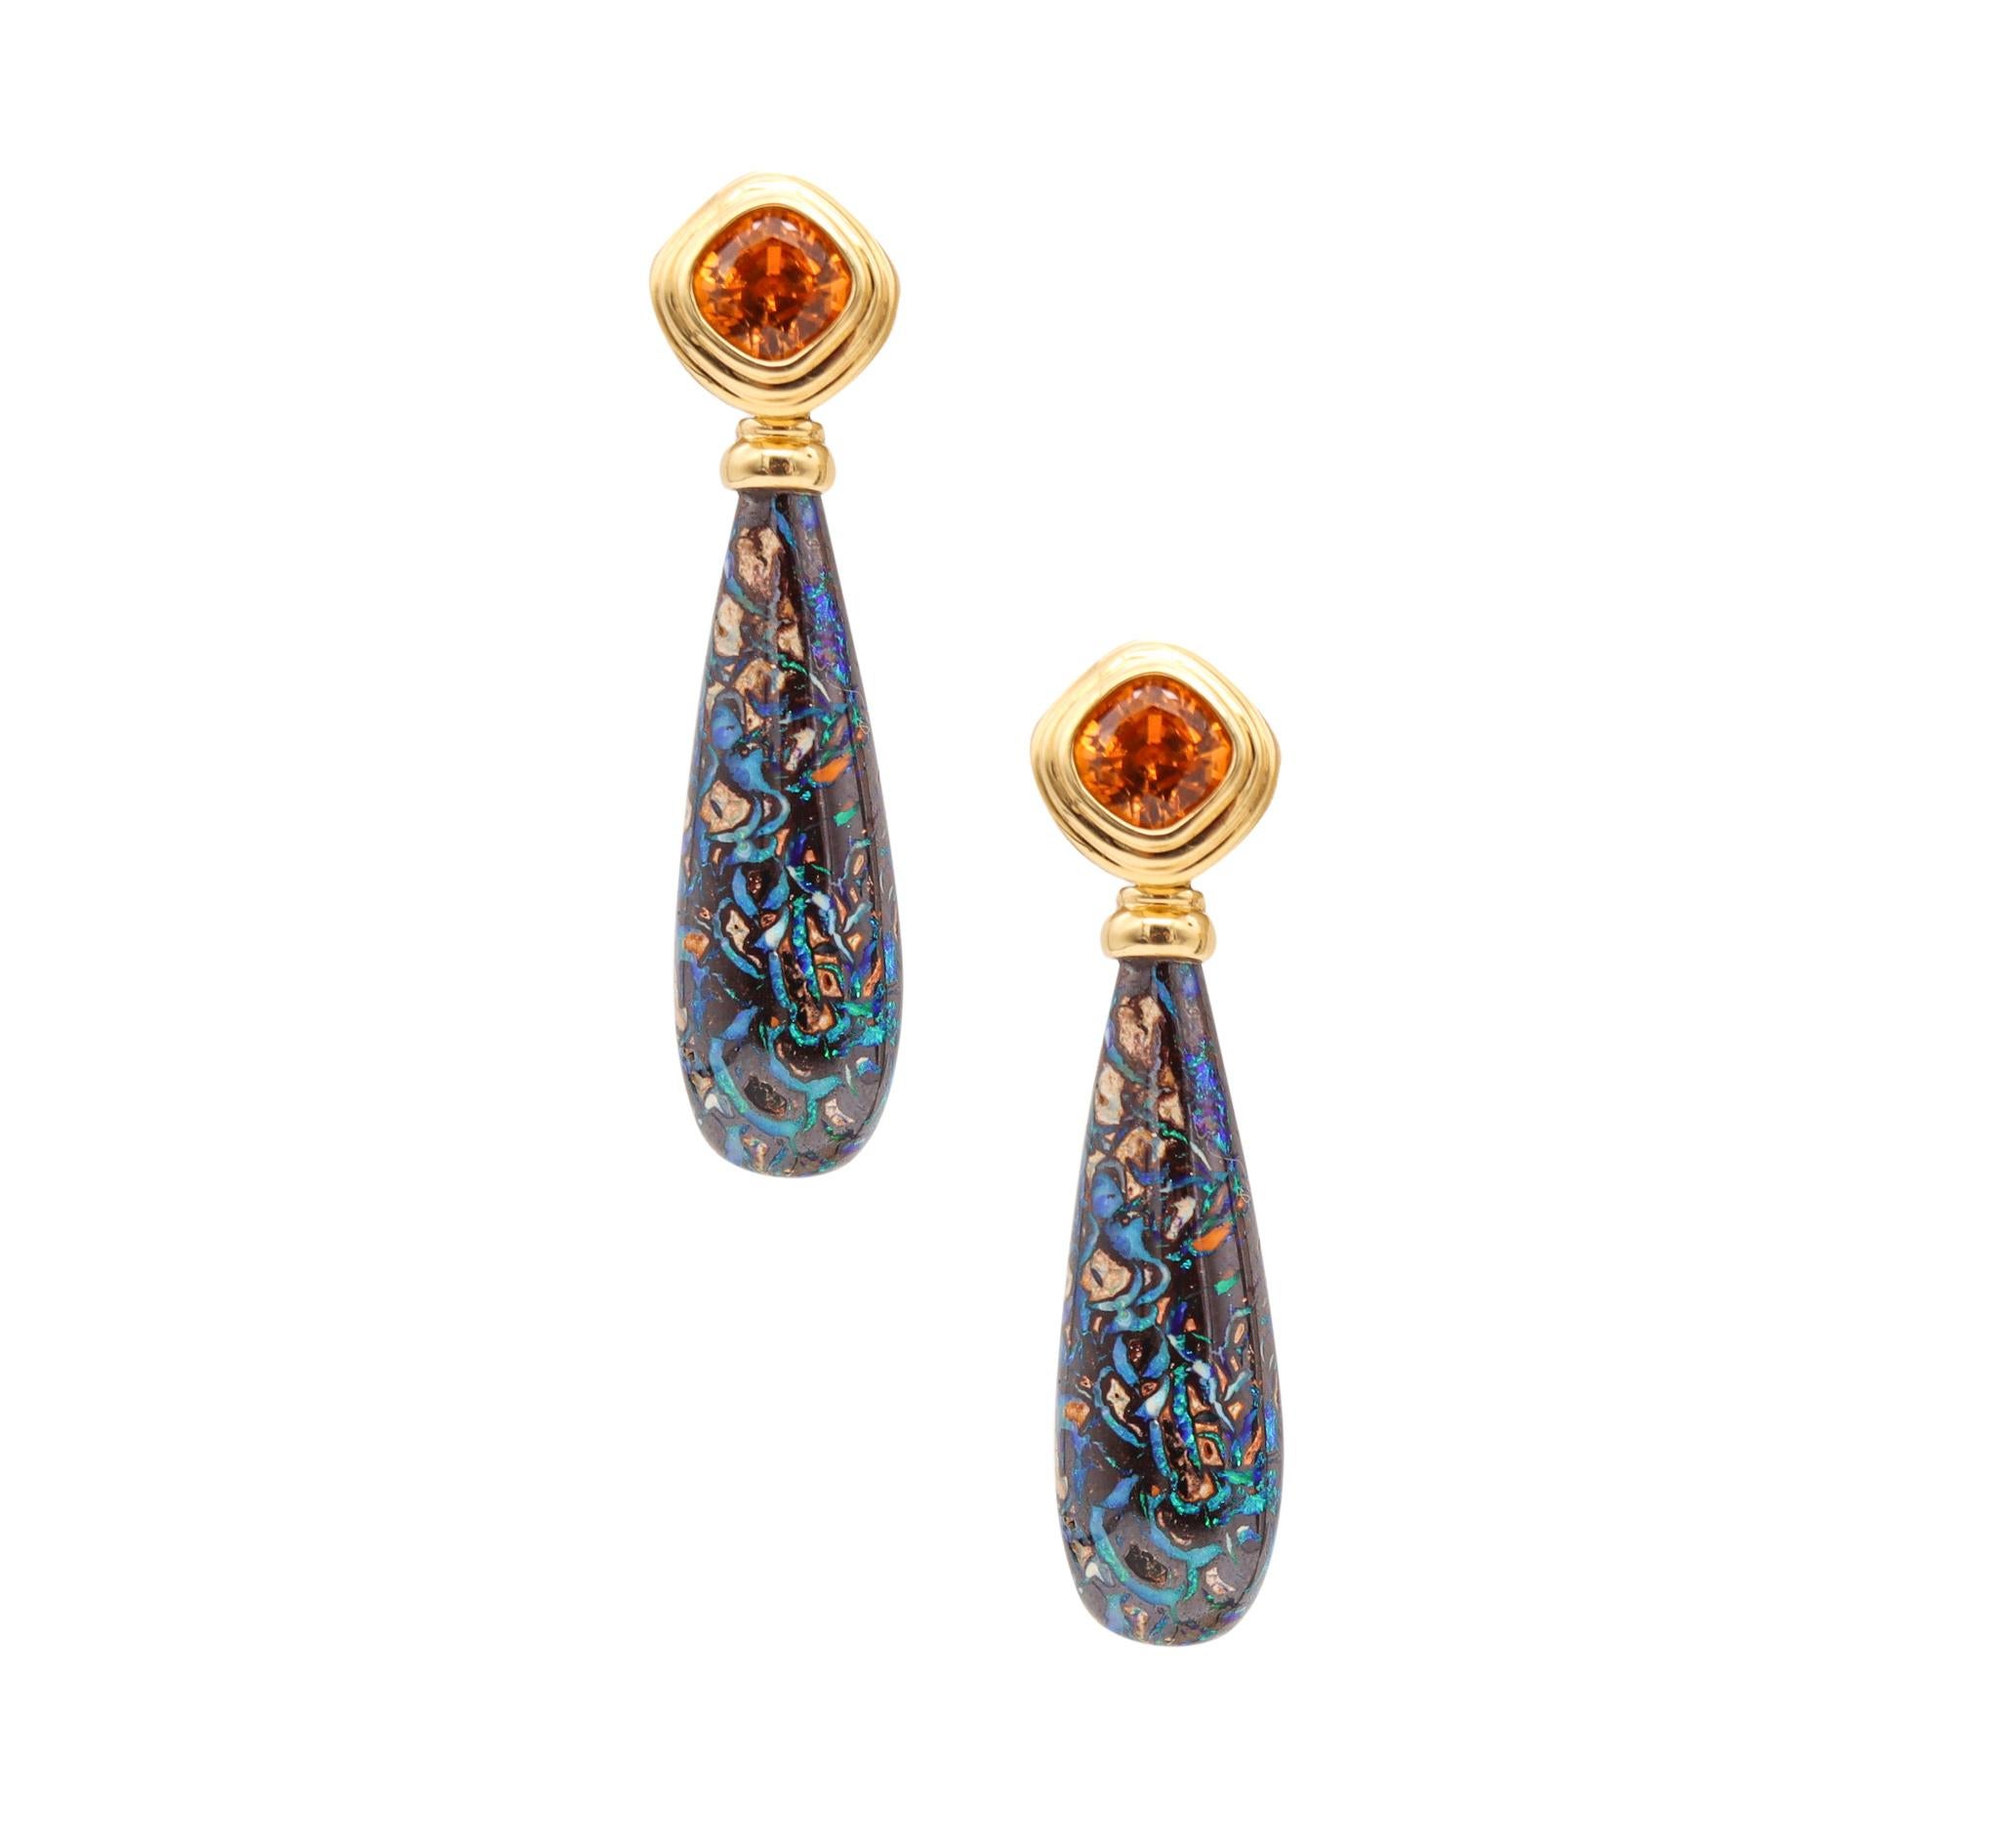 Gorgeous convertible earrings designed by Katherine Jetter.

Beautiful modernist and colorful pair, created in Nantucket United States by the jewelry designer Katherine Jetter. These one-of-a-kind versatile pieces has been crafted in solid yellow